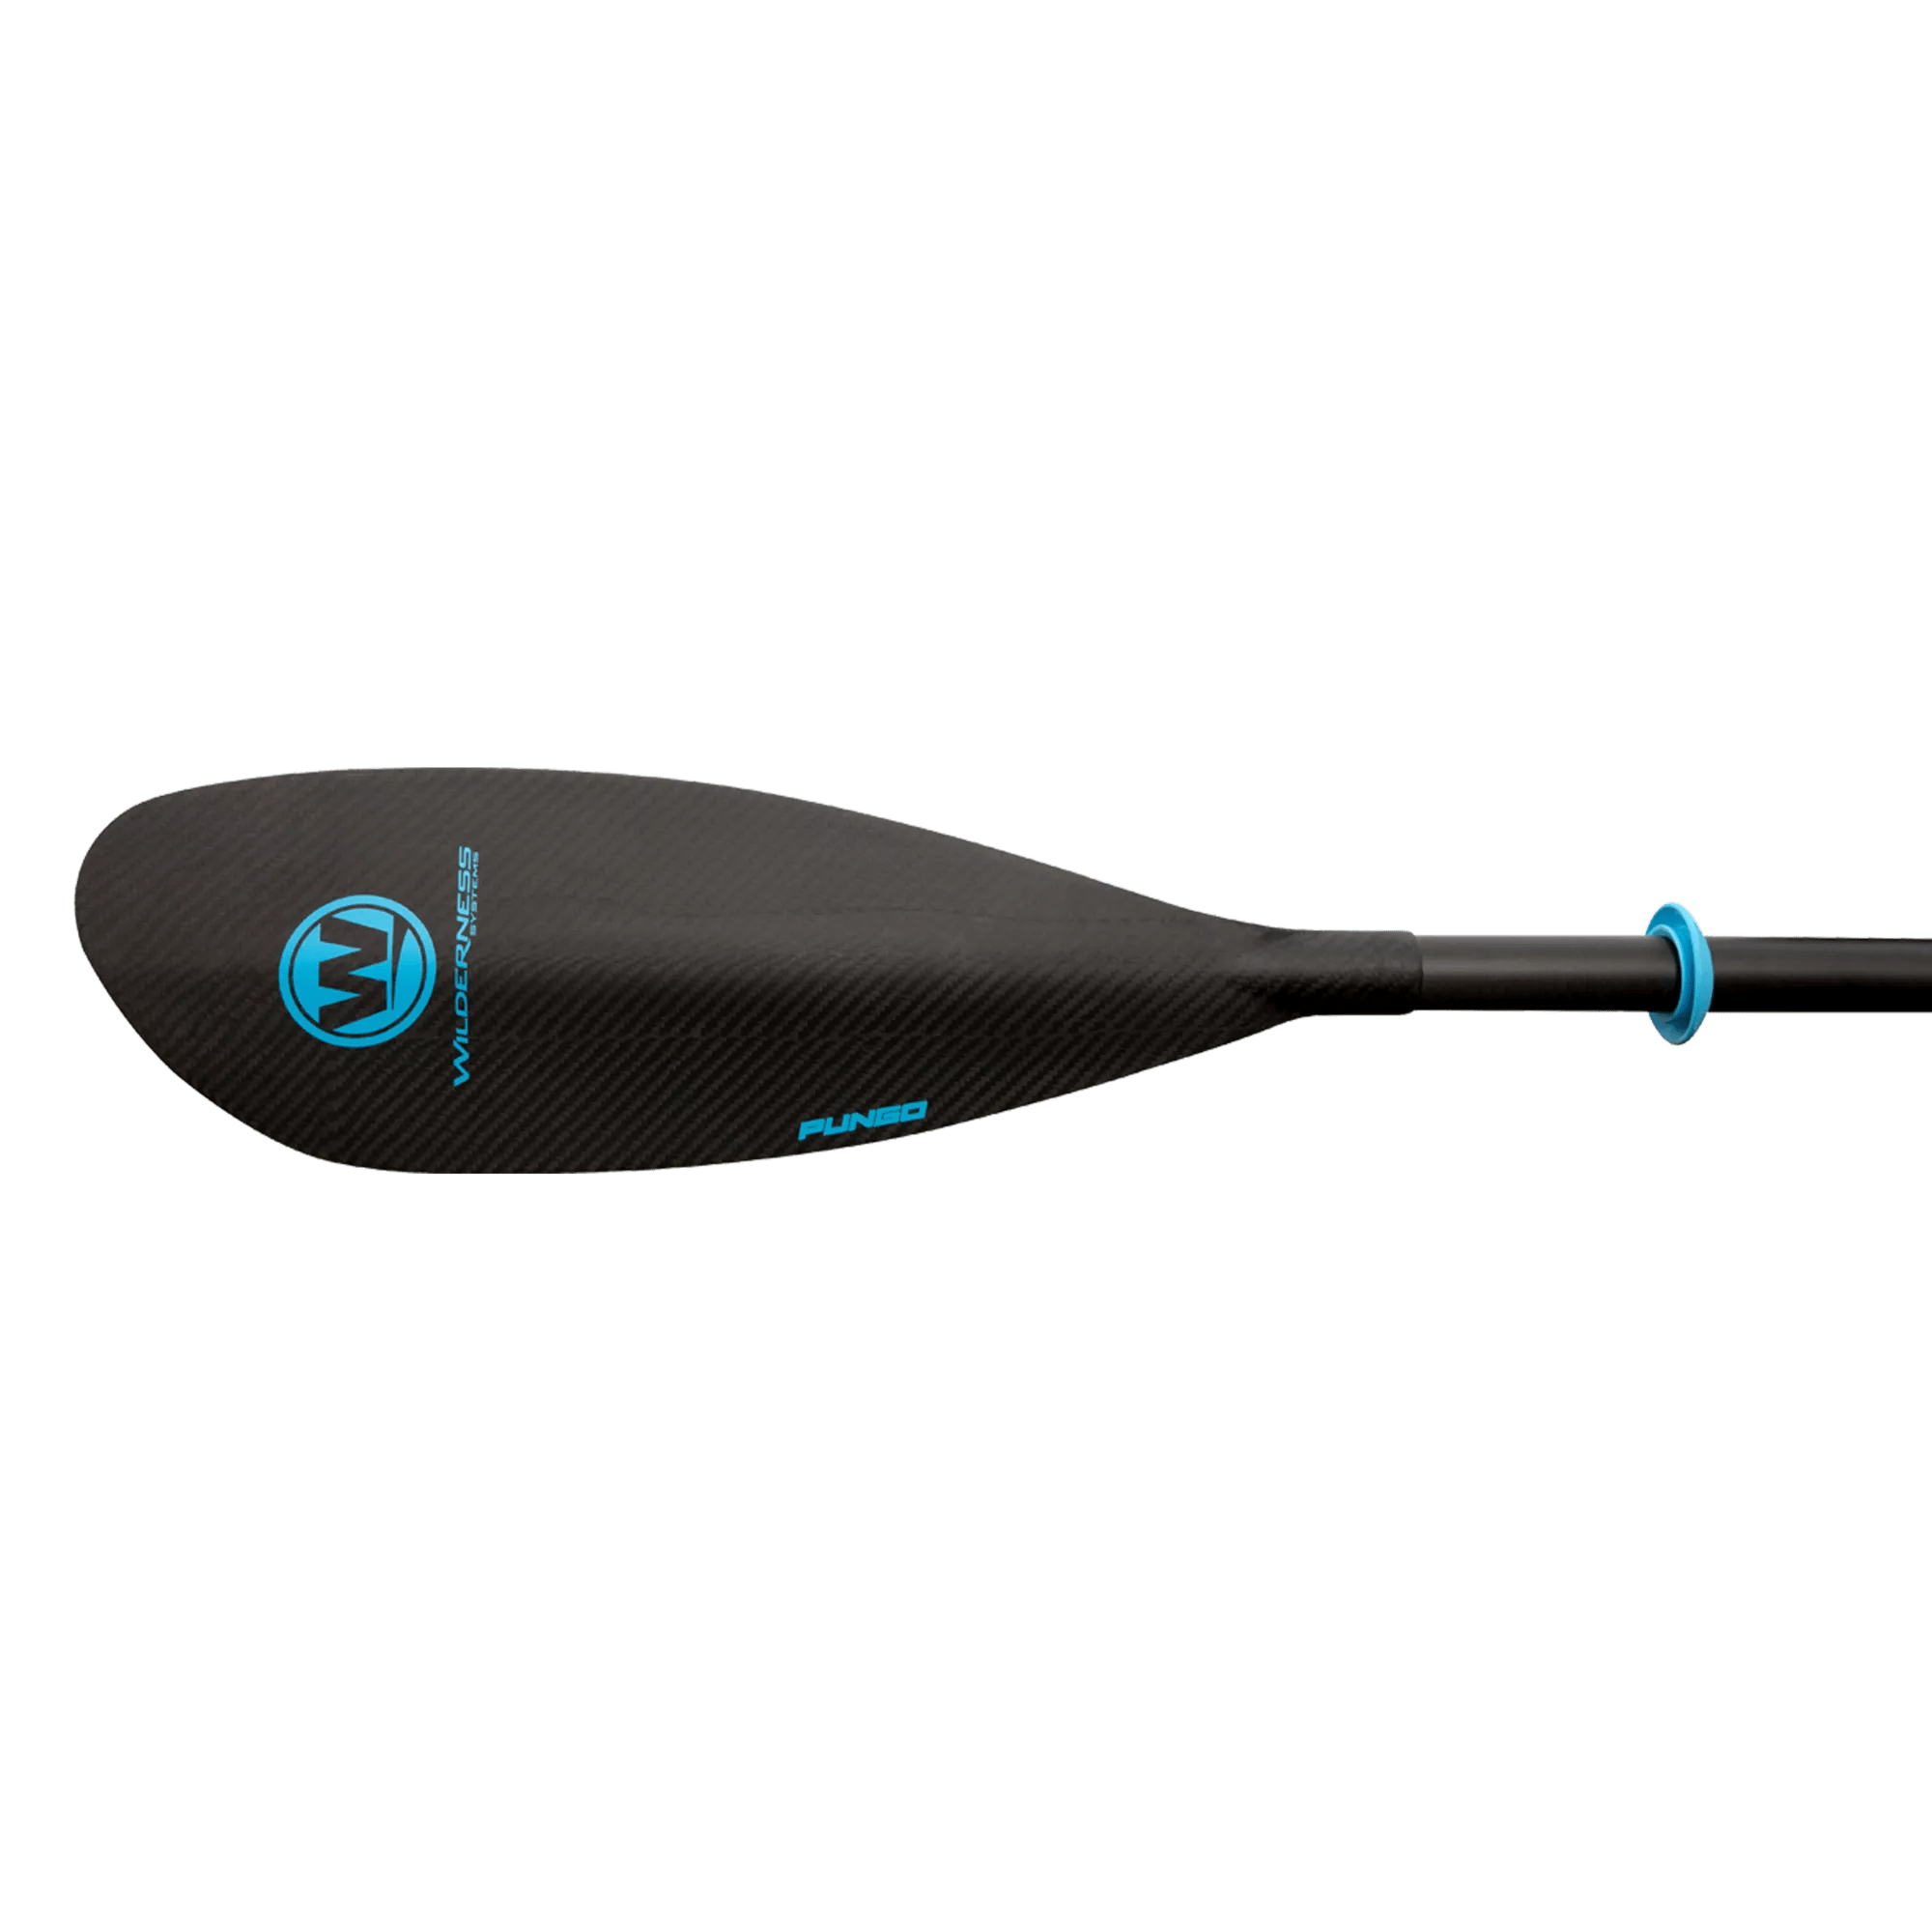 WILDERNESS SYSTEMS - Pungo Carbon Touring Paddle 220-240 cm - Black - 8070205 - TOP